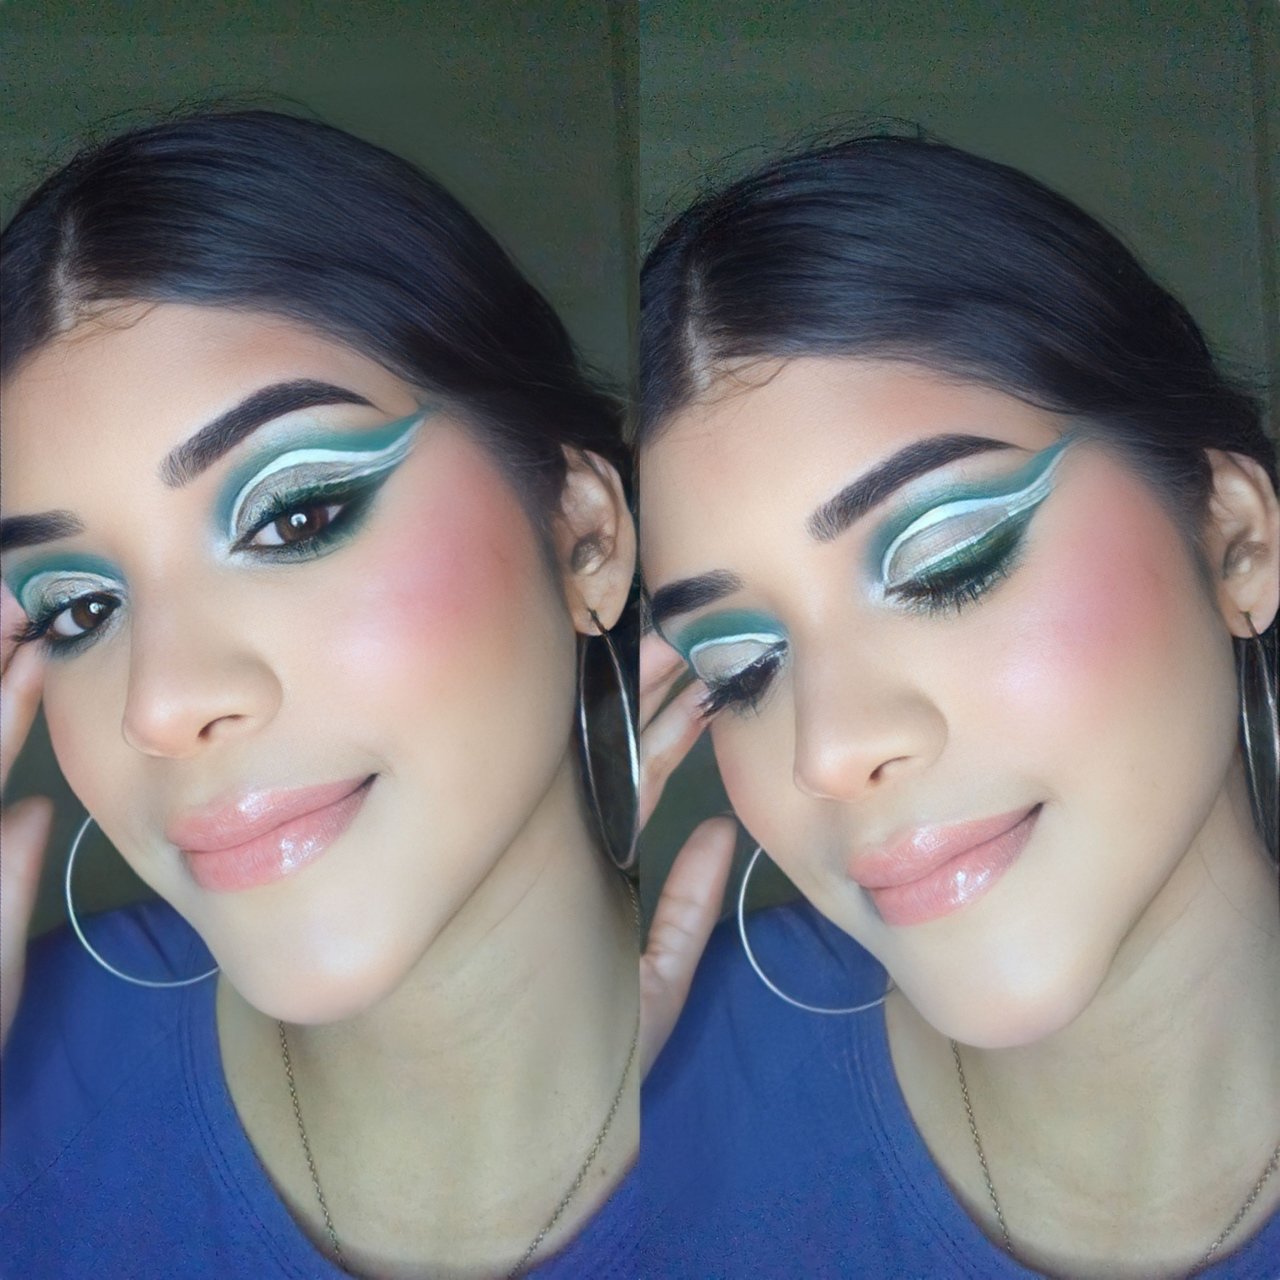 MAQUILLAJE EN TONOS VERDE CON NEGRO Y PLATEADO??? || MAKEUP IN SHADES OF  GREEN WITH BLACK AND SILVER??? // By Yuliannys? | PeakD